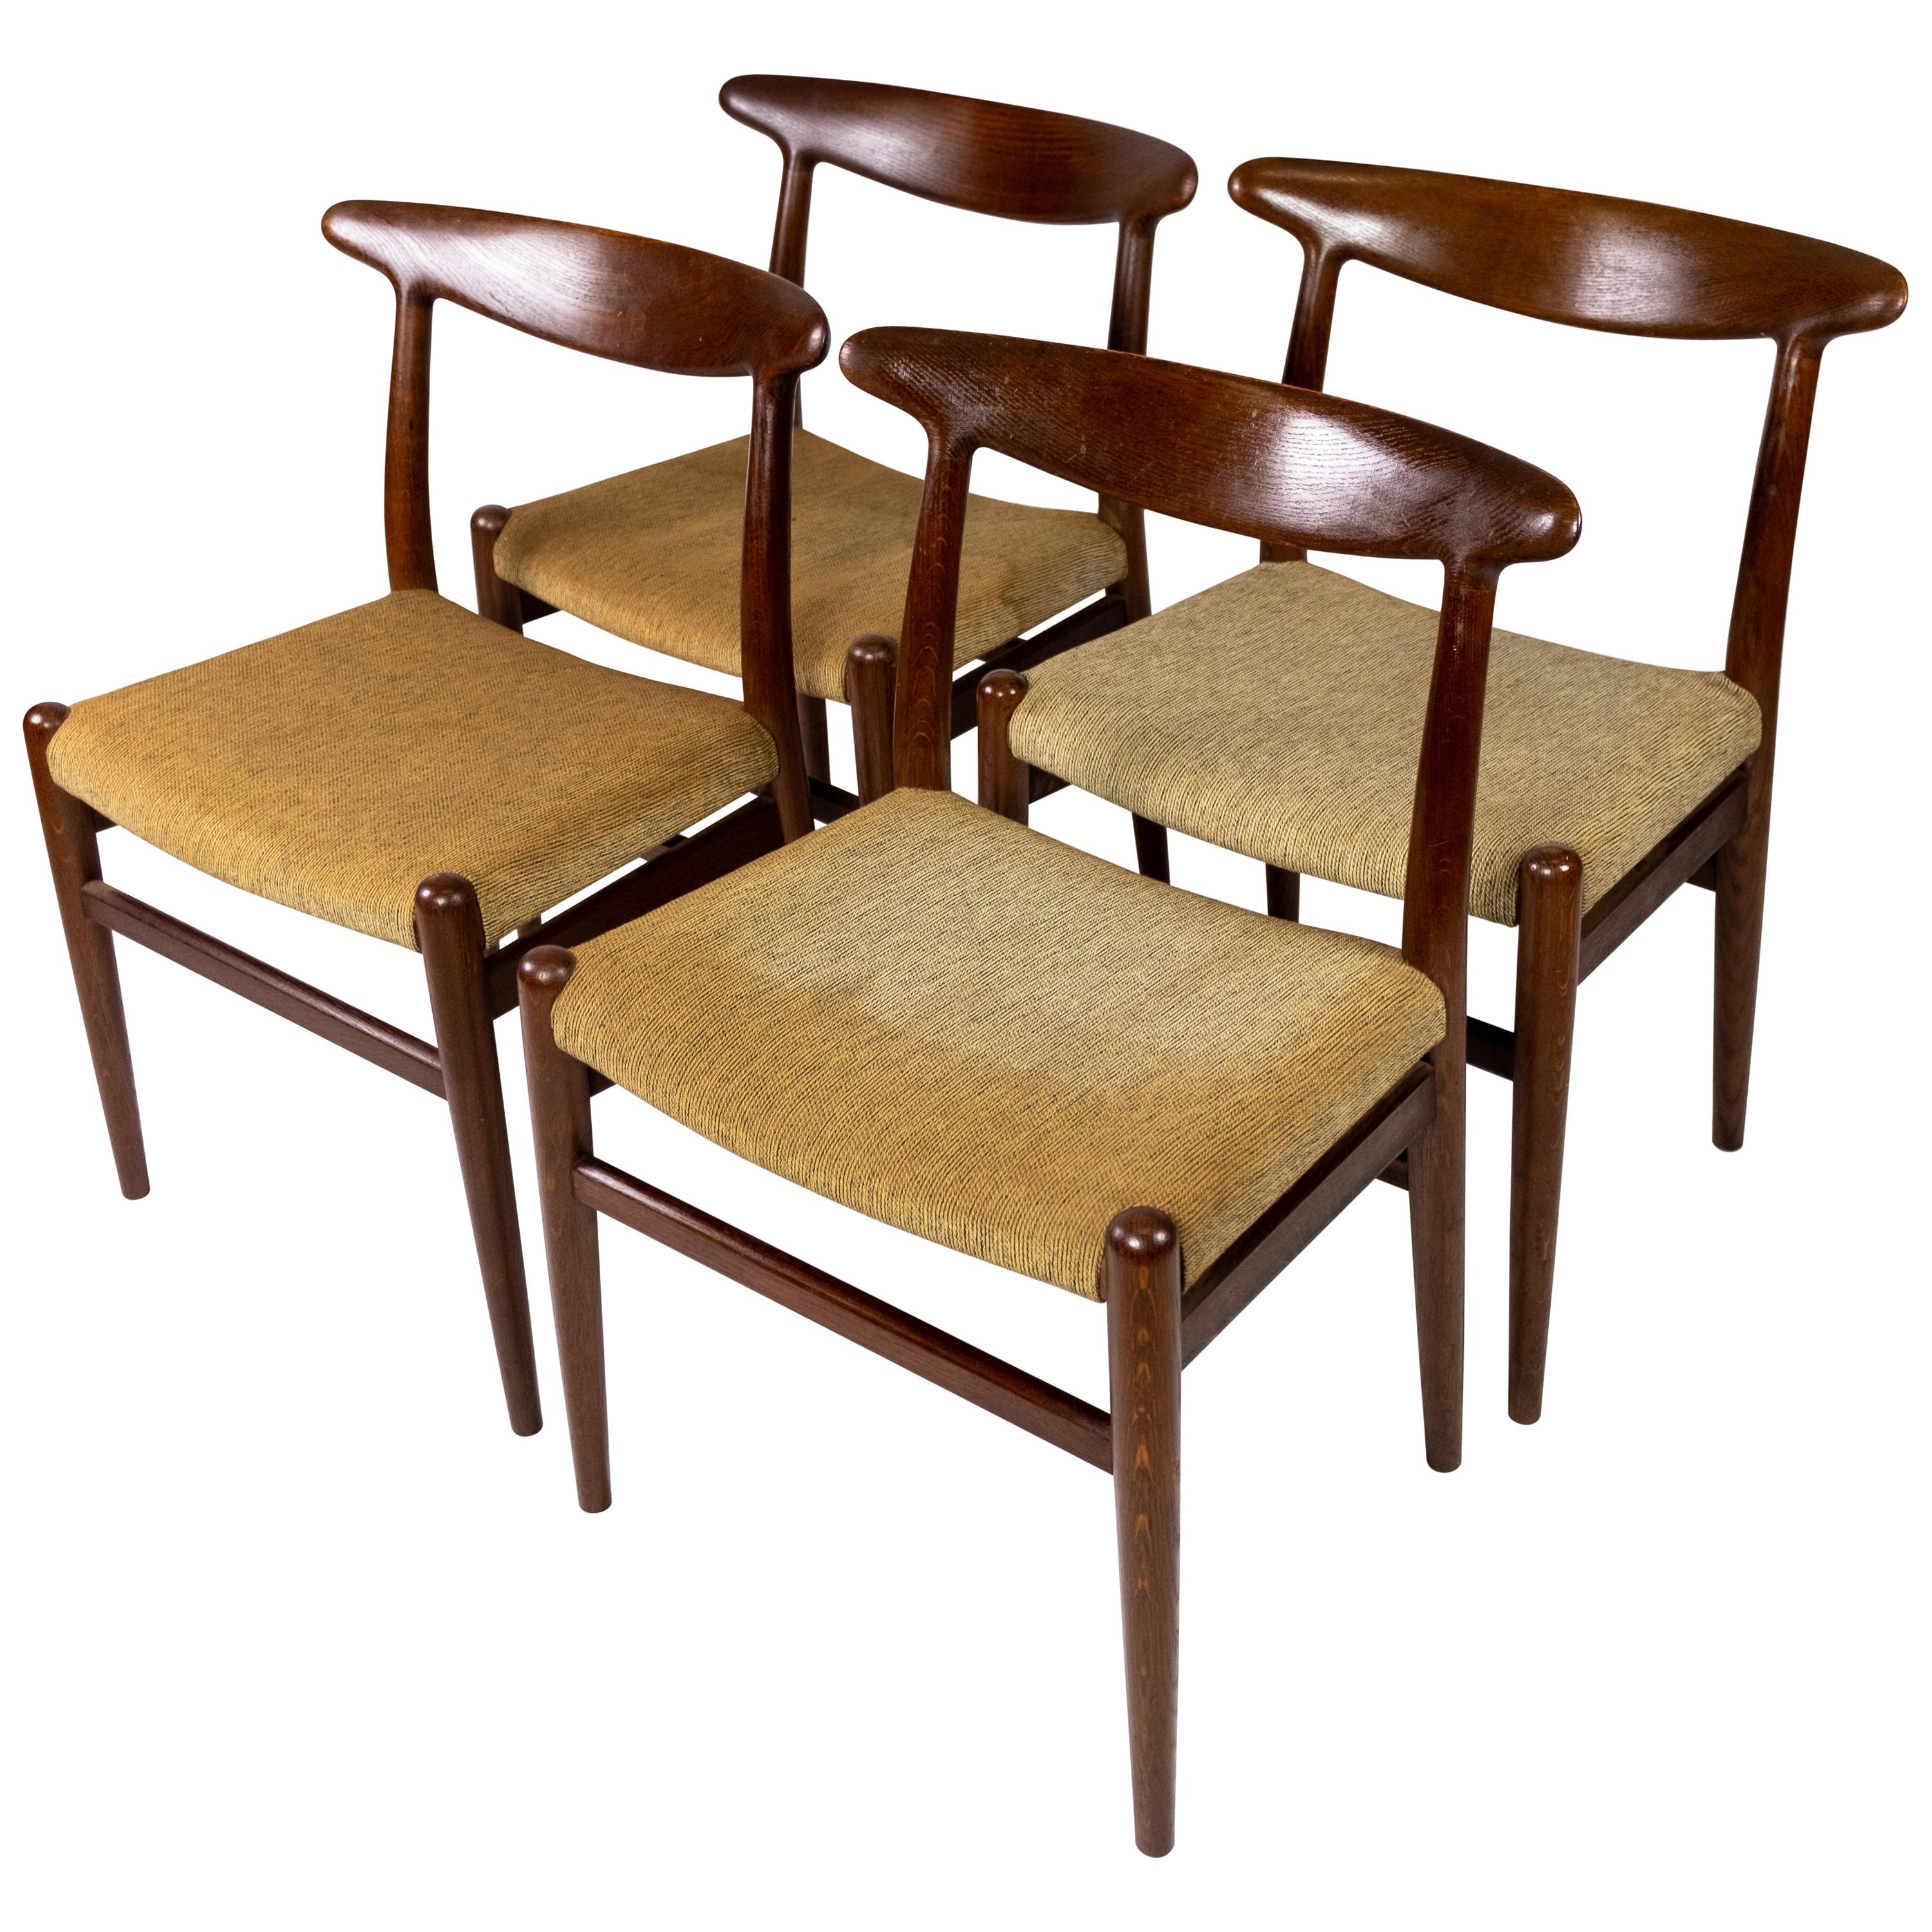 Set of Four Dining Room Chairs, Model W2, Designed by Hans J. Wegner, 1960s